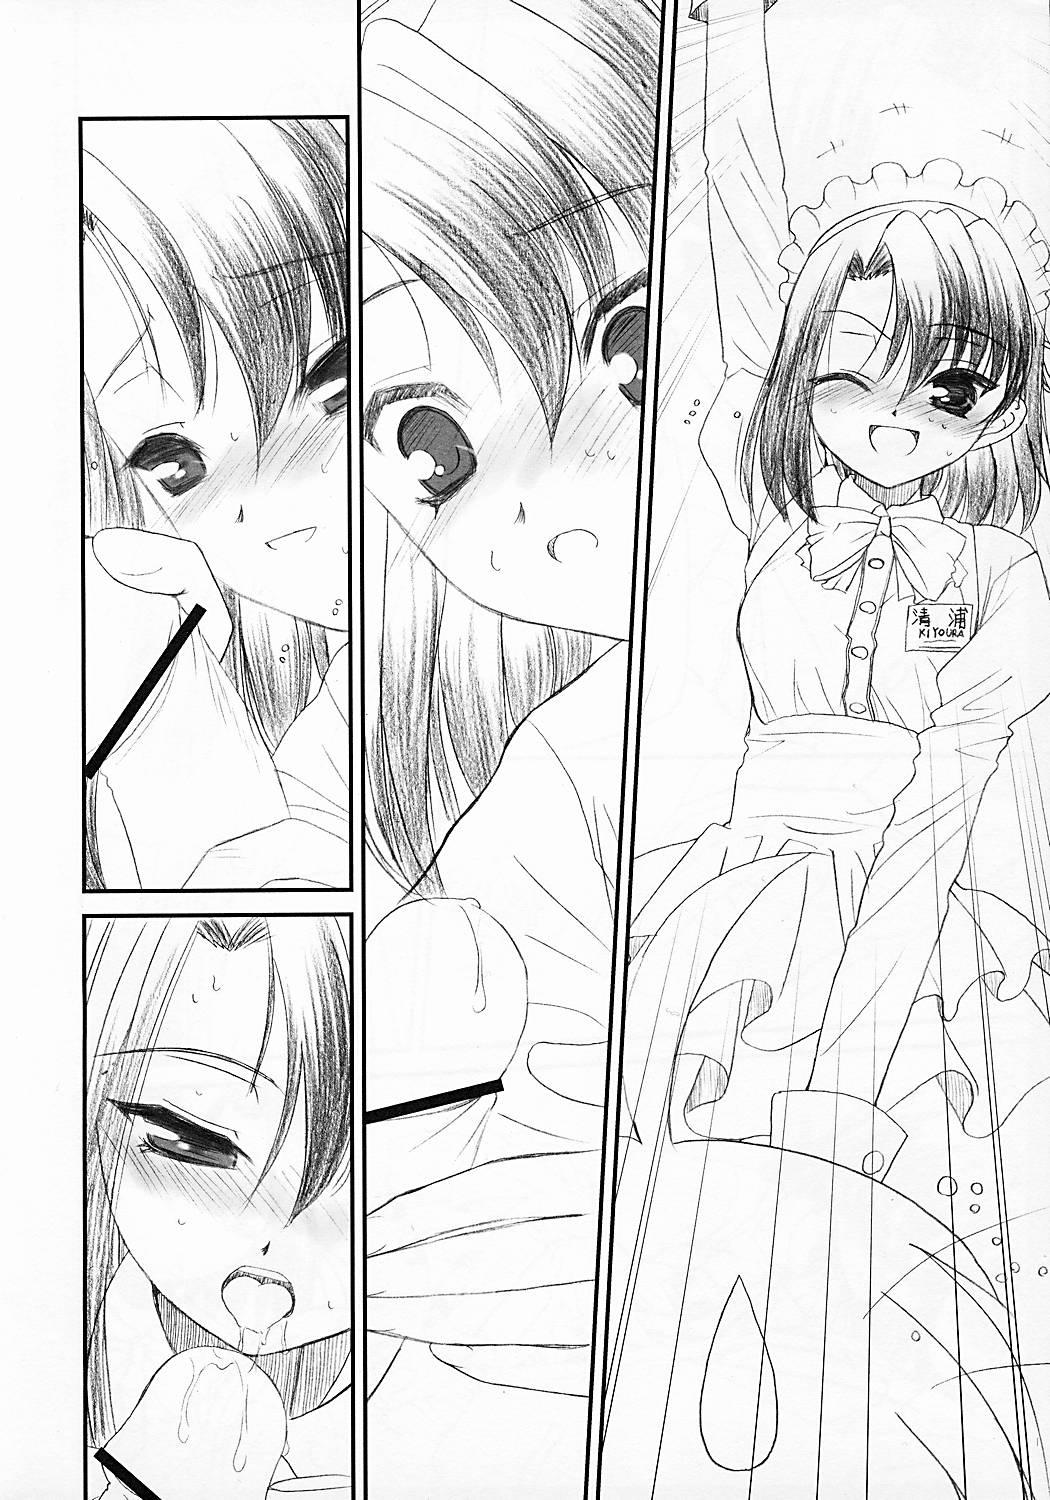 Real Orgasms Secchan no Himichu - Prototype ver. 0.01 - School days Youporn - Page 4